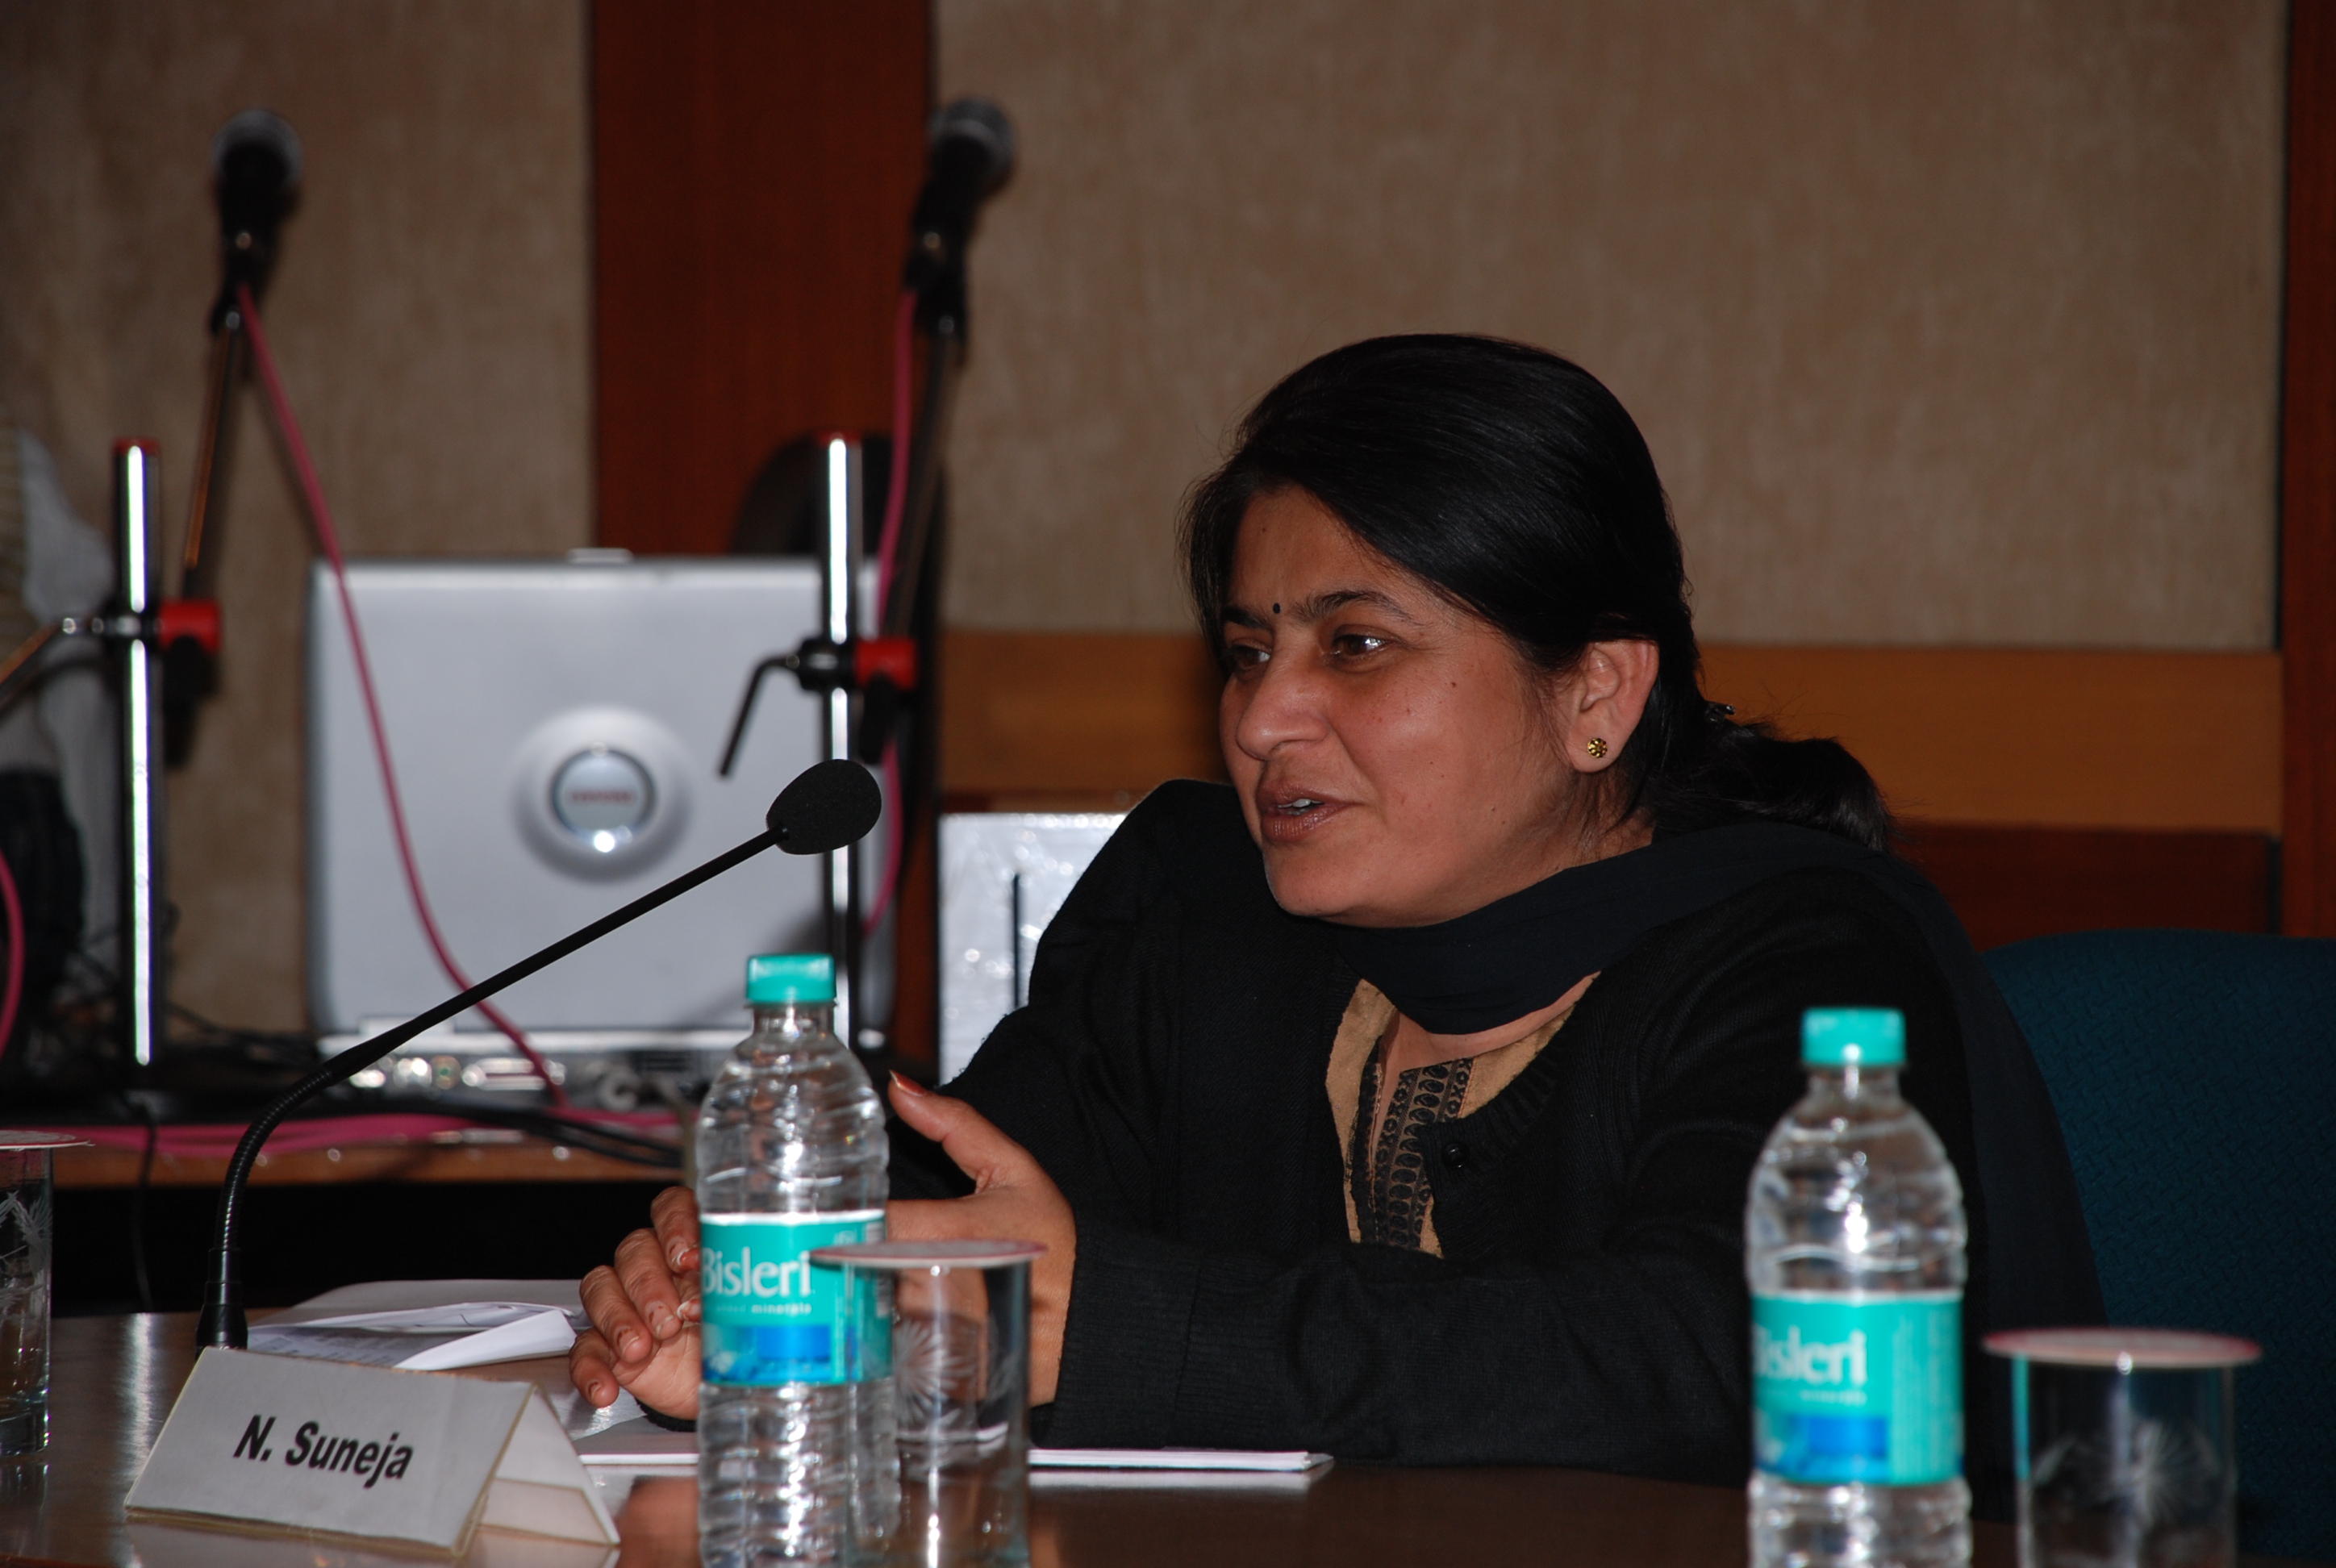 Ms. N. Suneja, Jt. Director, Ministry of Agriculture, Explaining the ATMA scheme to the participants